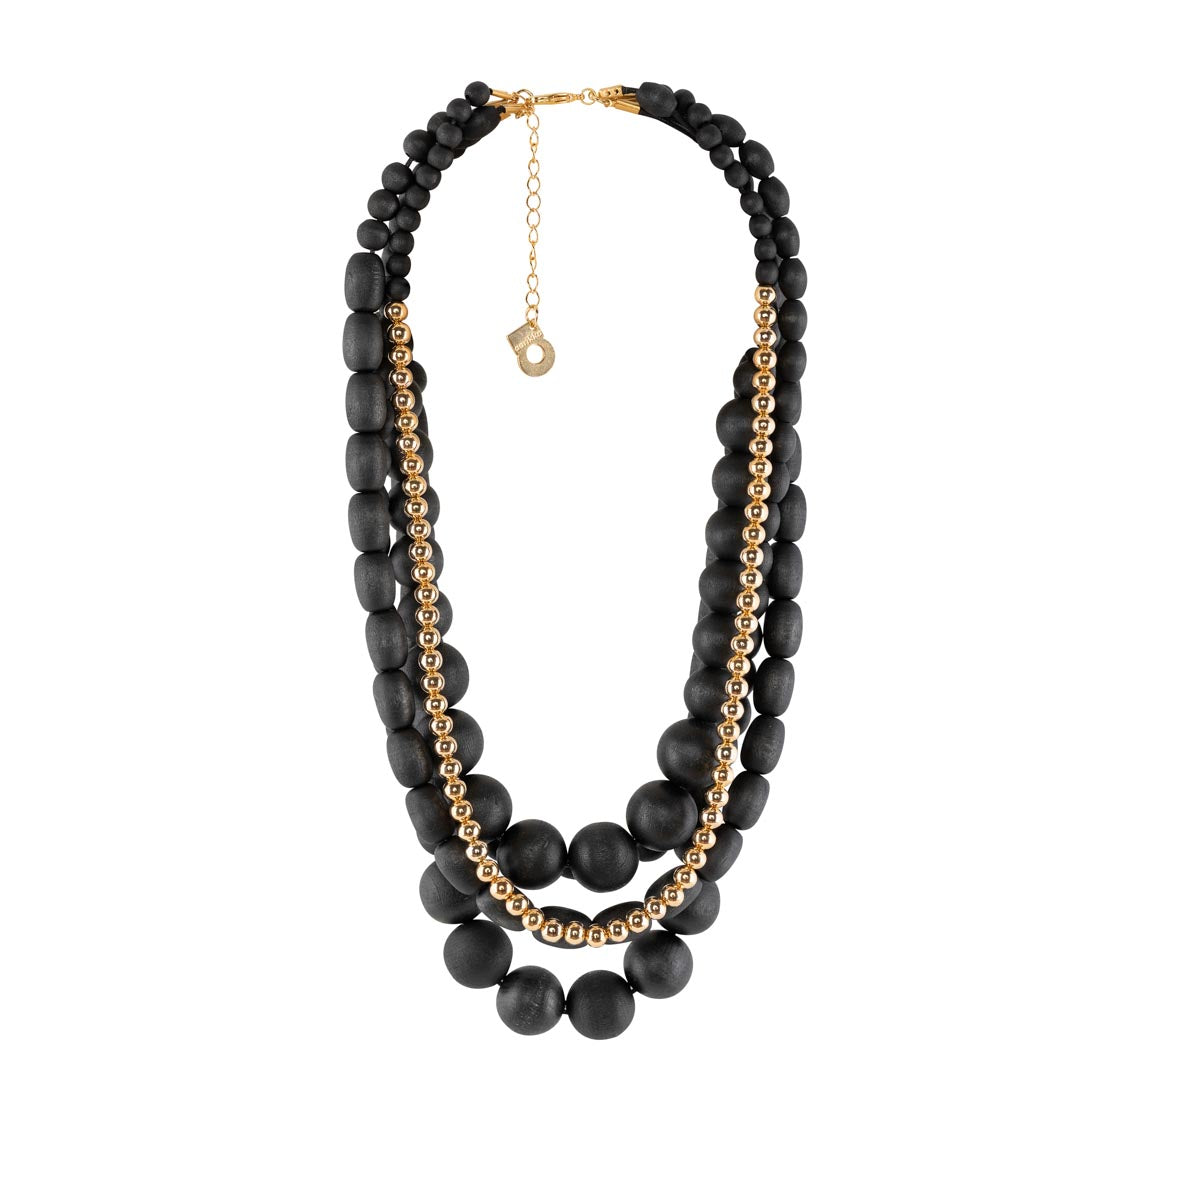 Casandra necklace, black and gold